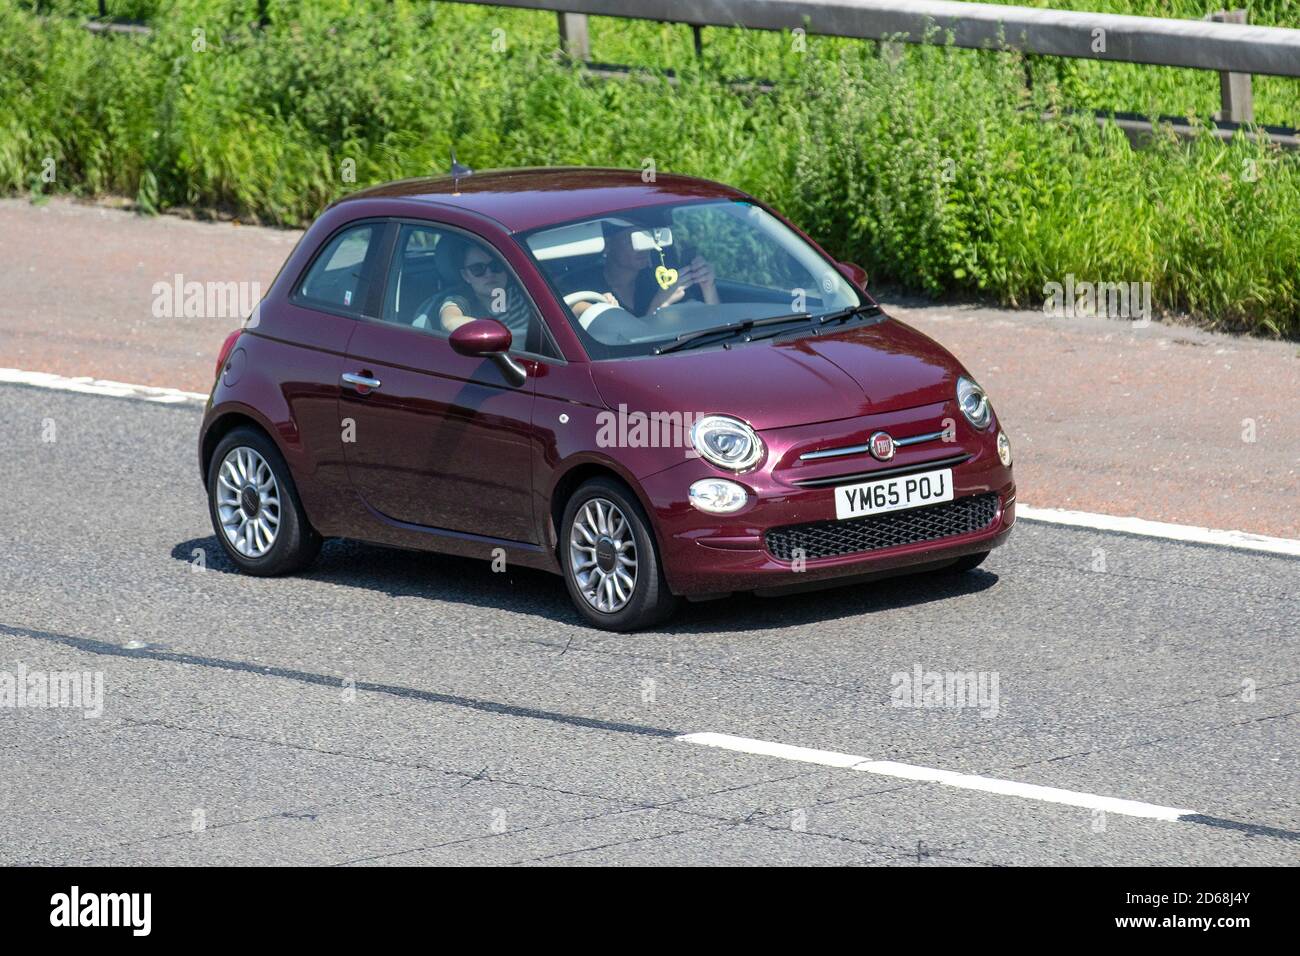 2016 red FIAT 500 HATCHBACK 1.2 Pop Star 3d; Vehicular traffic, moving vehicles, cars, vehicle driving on UK roads, motors, motoring on the M6 motorway highway UK road network. Stock Photo